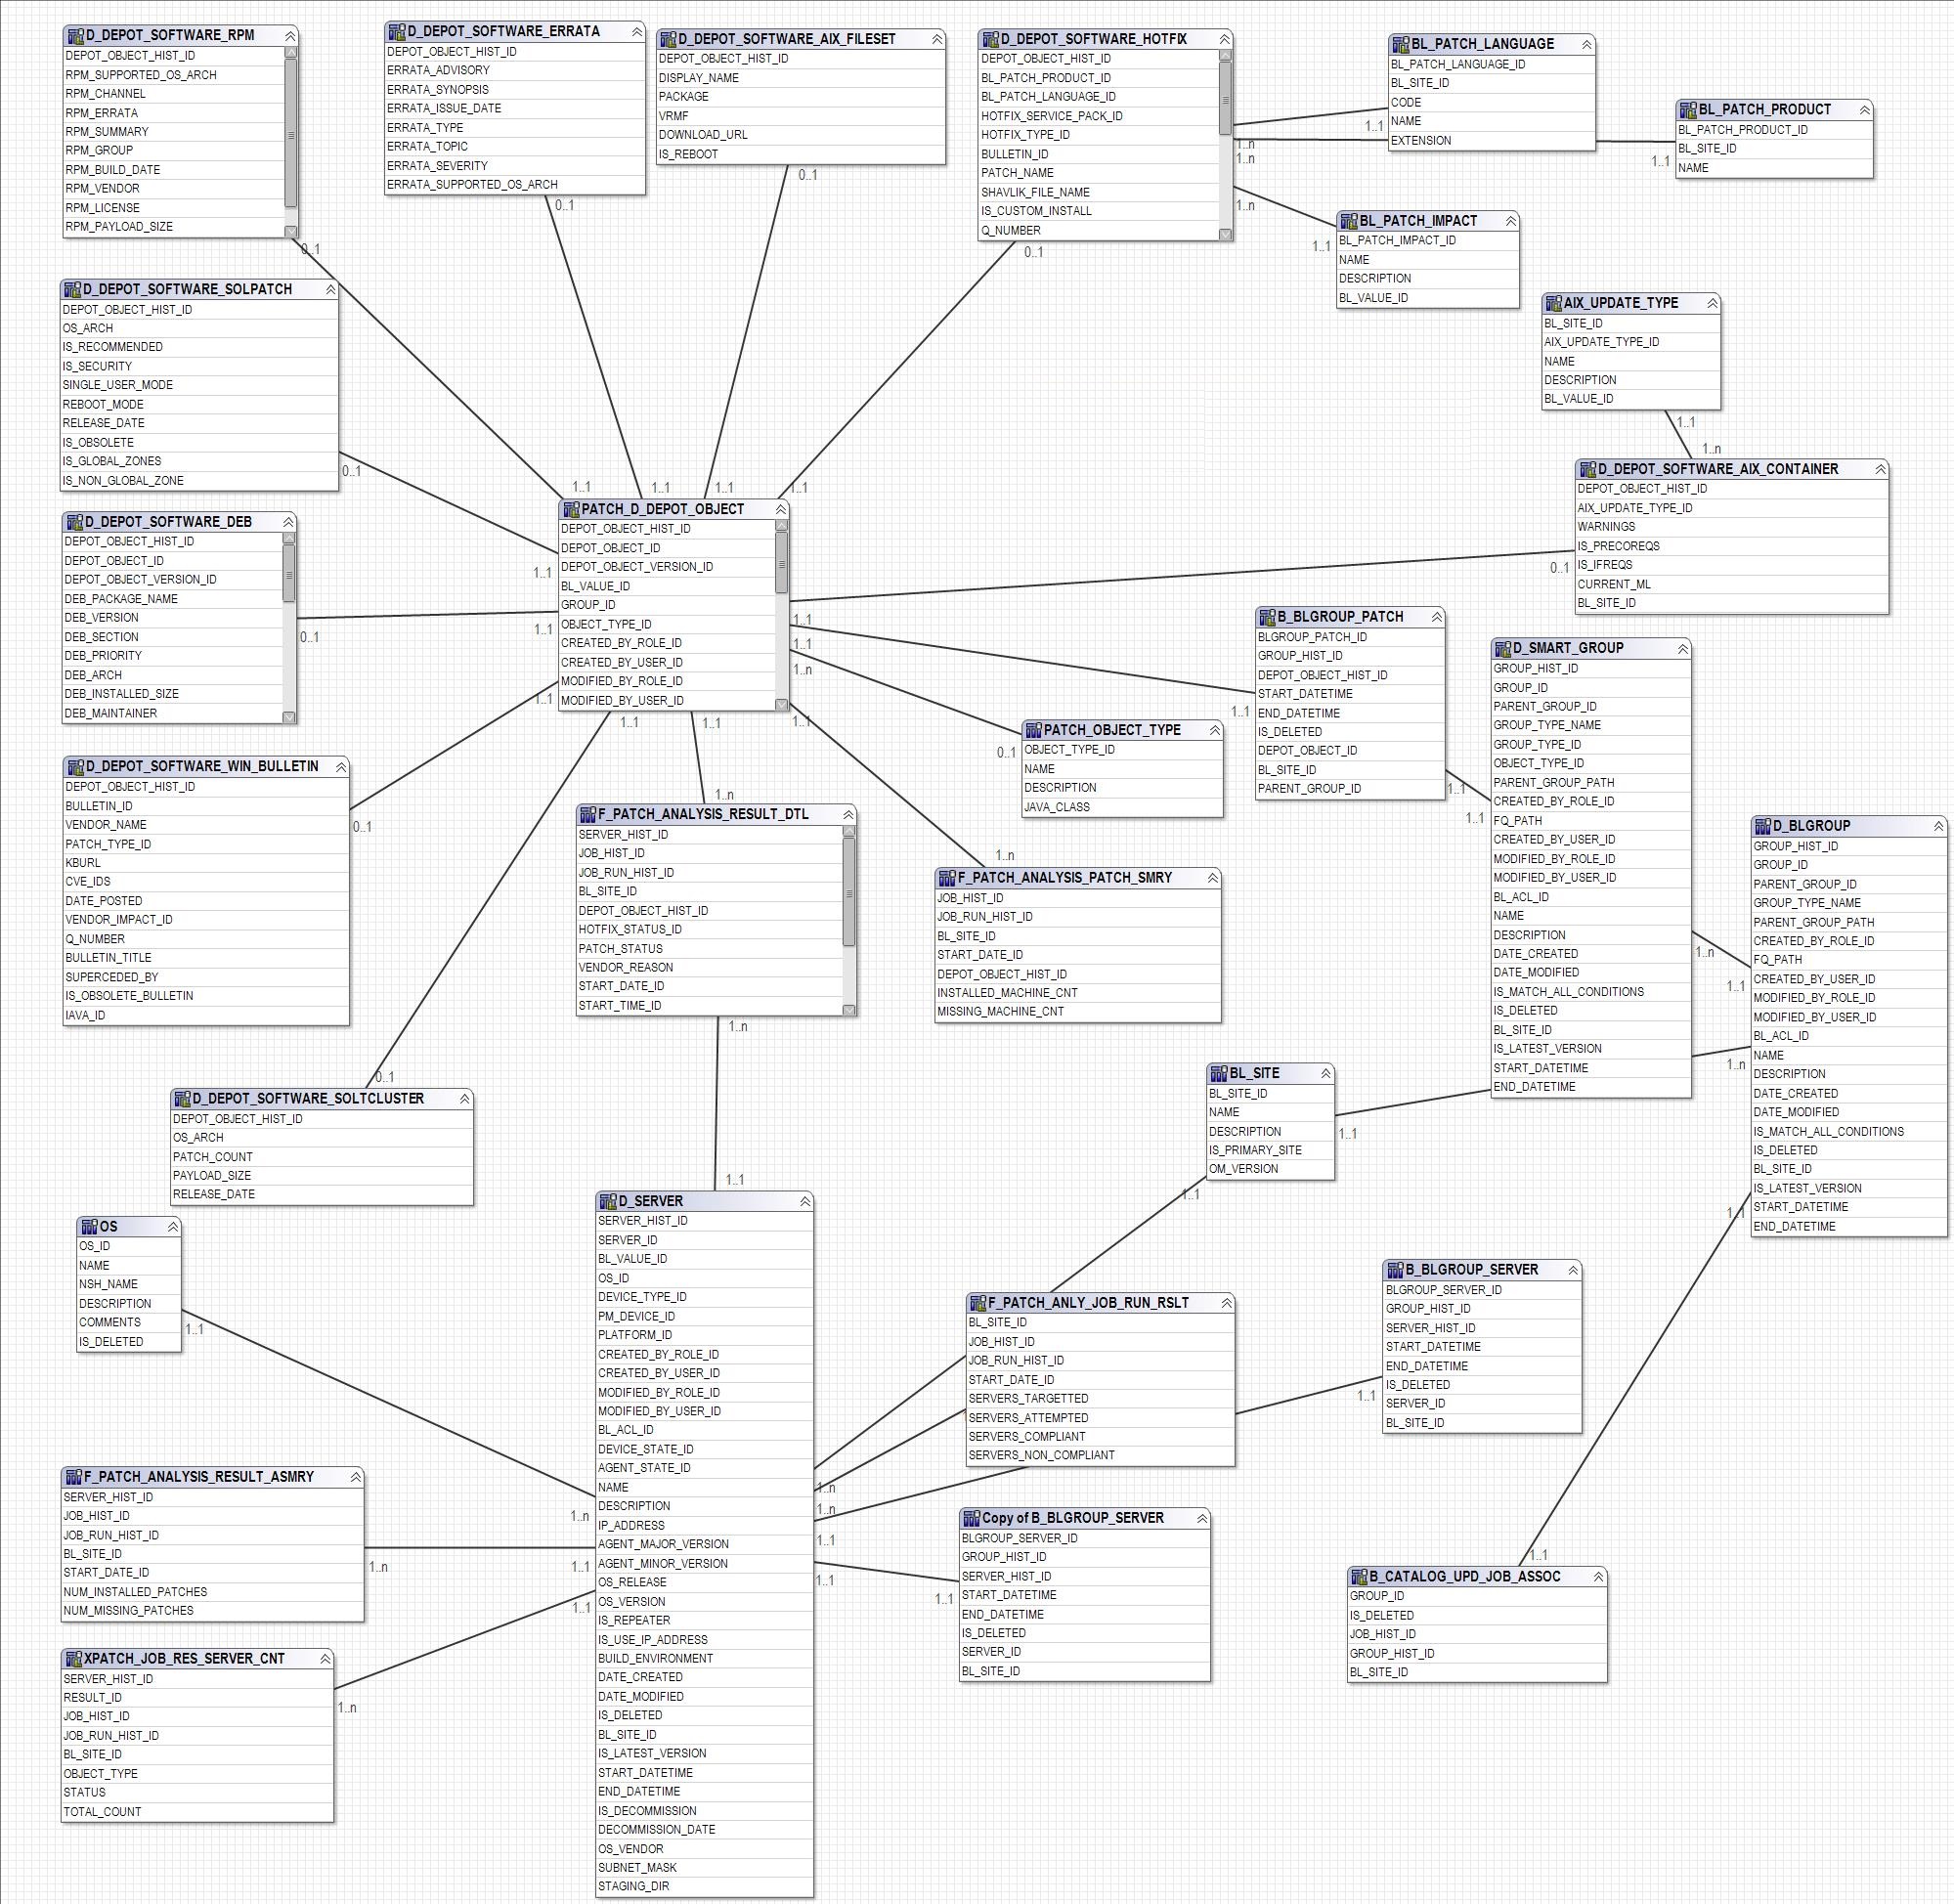 Google Docs Entity Relationship Diagram Image collections 